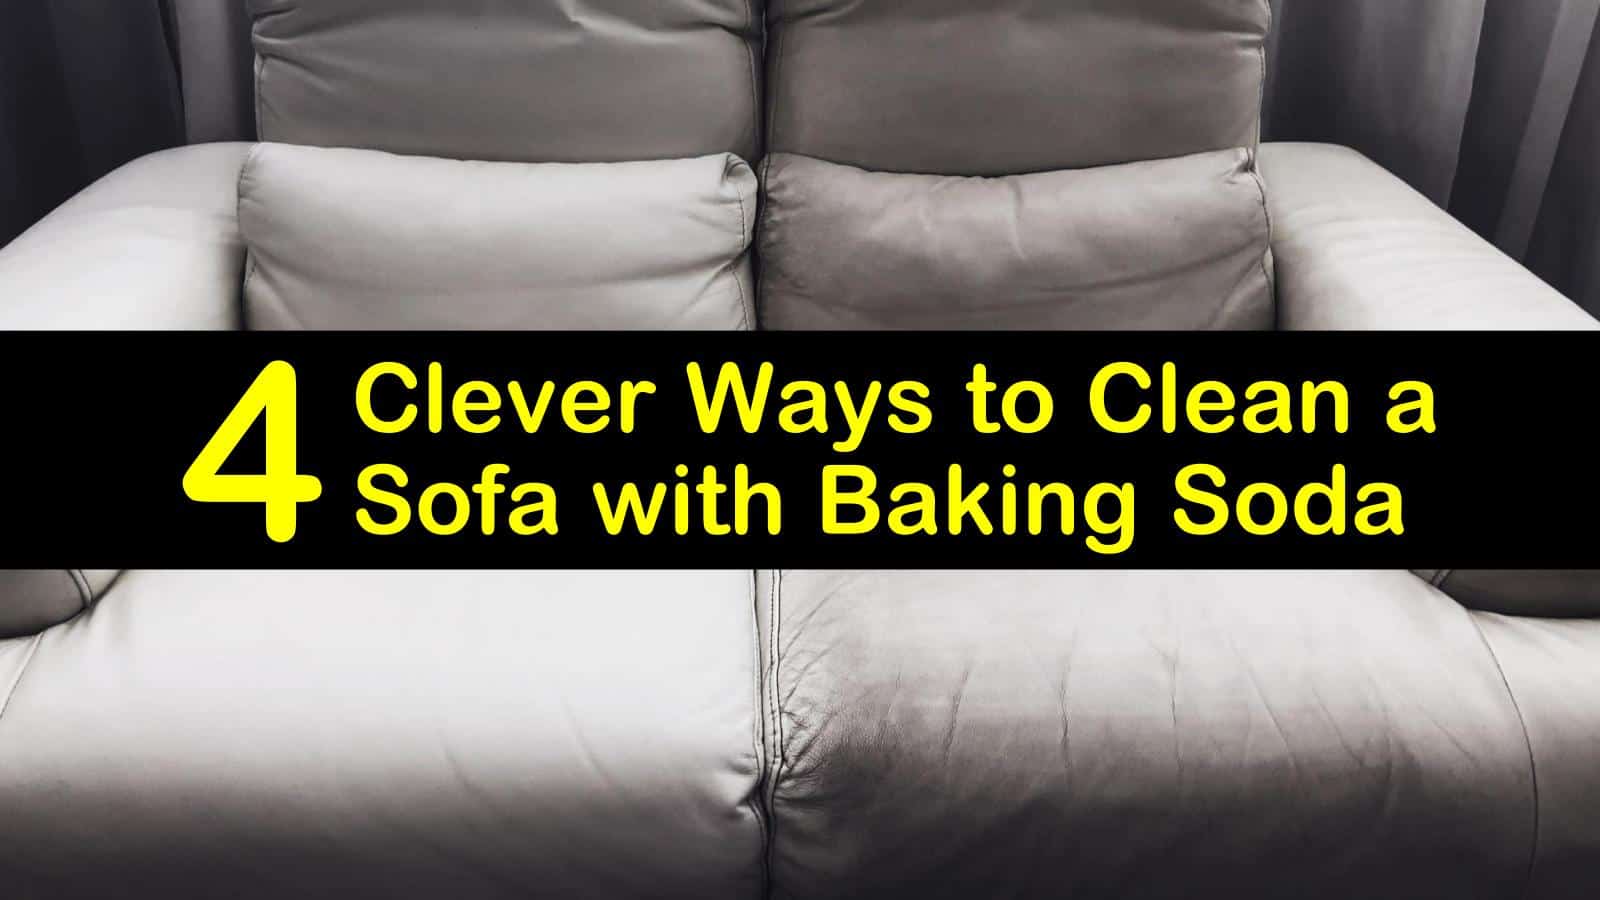 17 Clever Ways to Clean a Sofa with Baking Soda